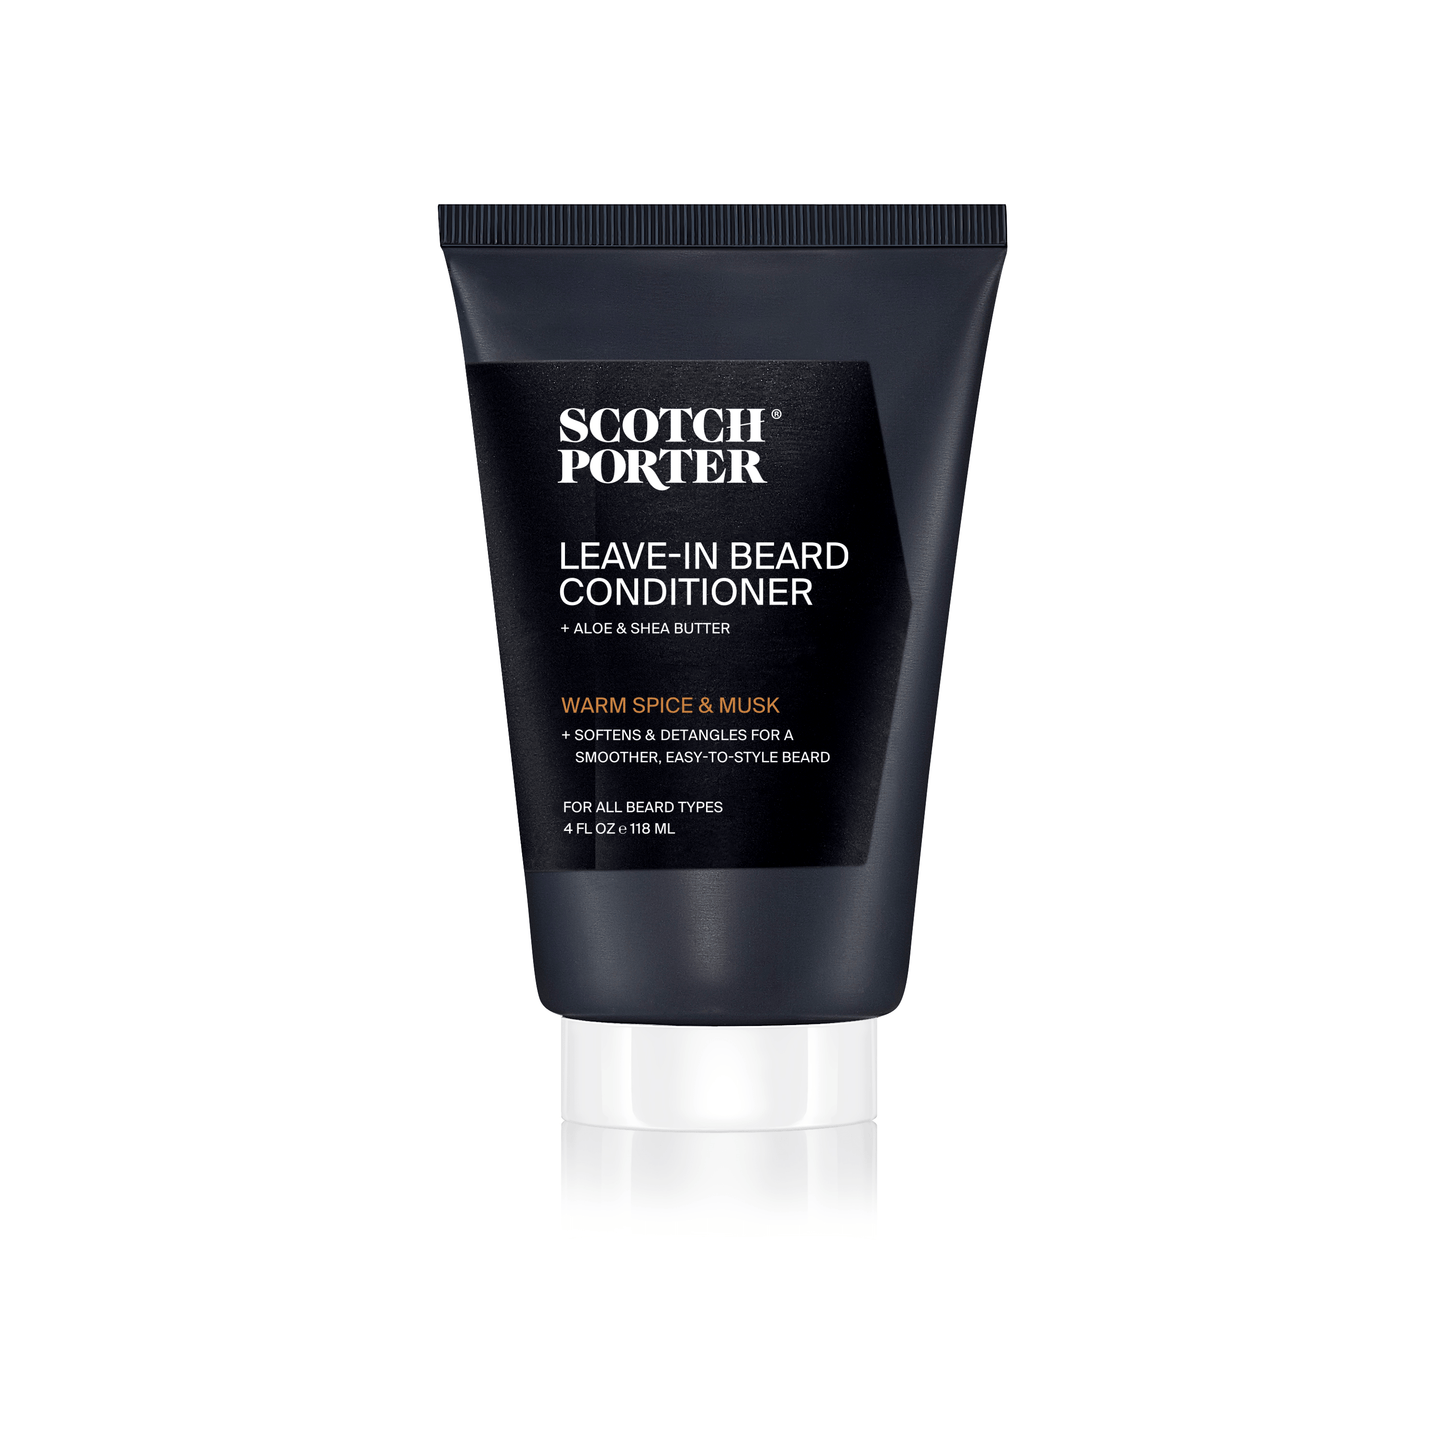 SCOTCH PORTER BRAND Beard Care Products Hydrate & Nourish Beard Conditioner: Deep Conditioning for a Healthy Beard